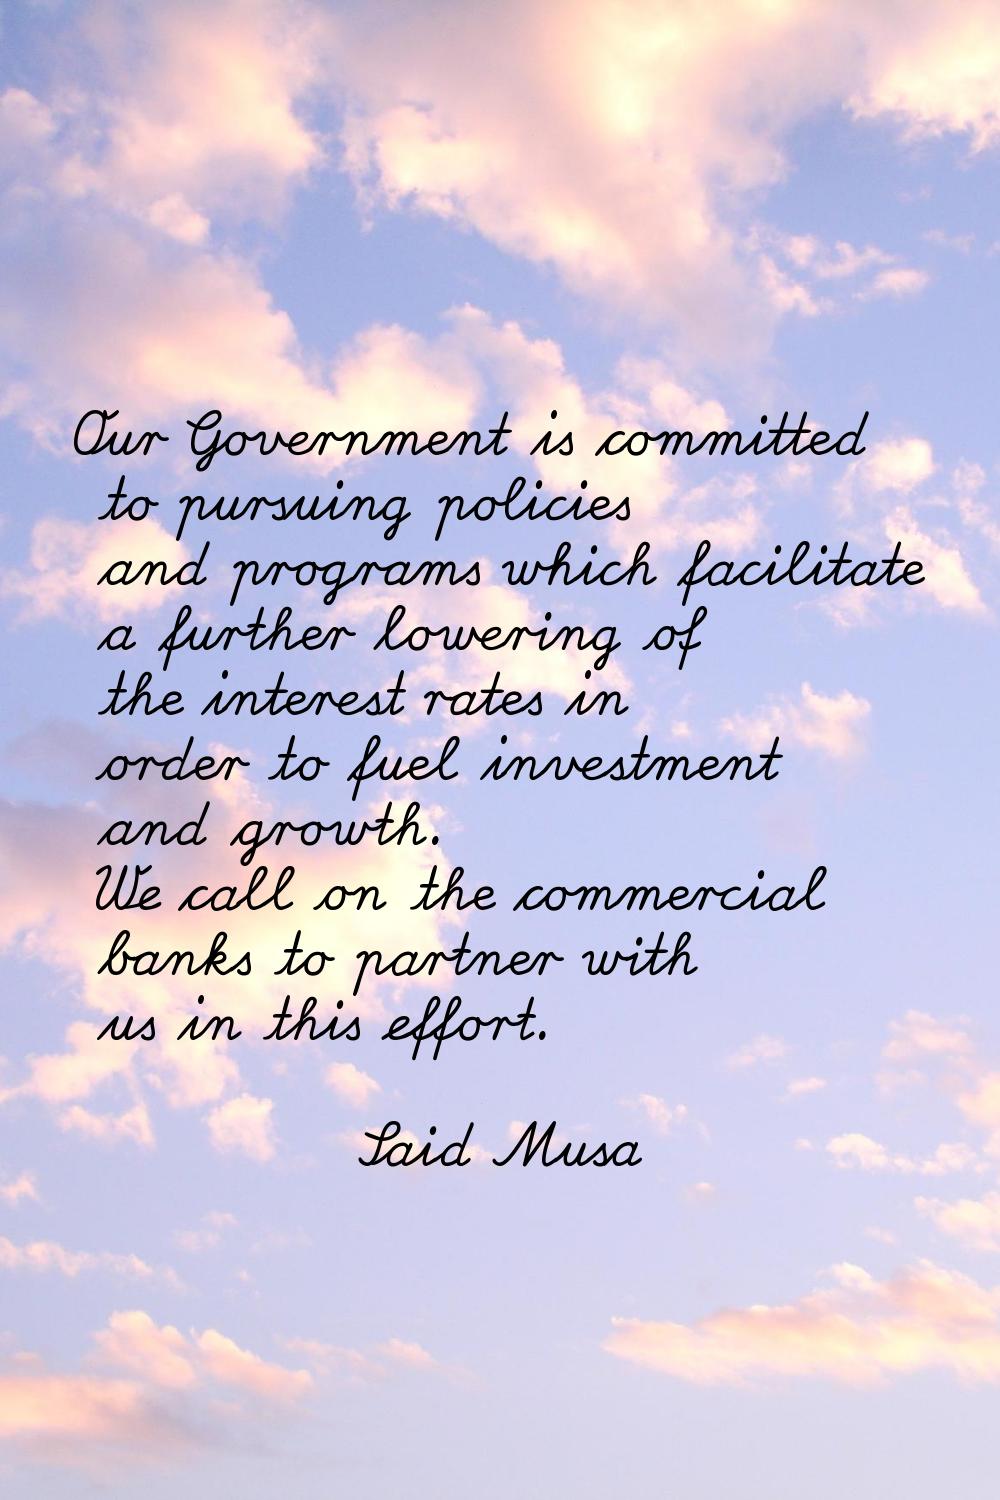 Our Government is committed to pursuing policies and programs which facilitate a further lowering o